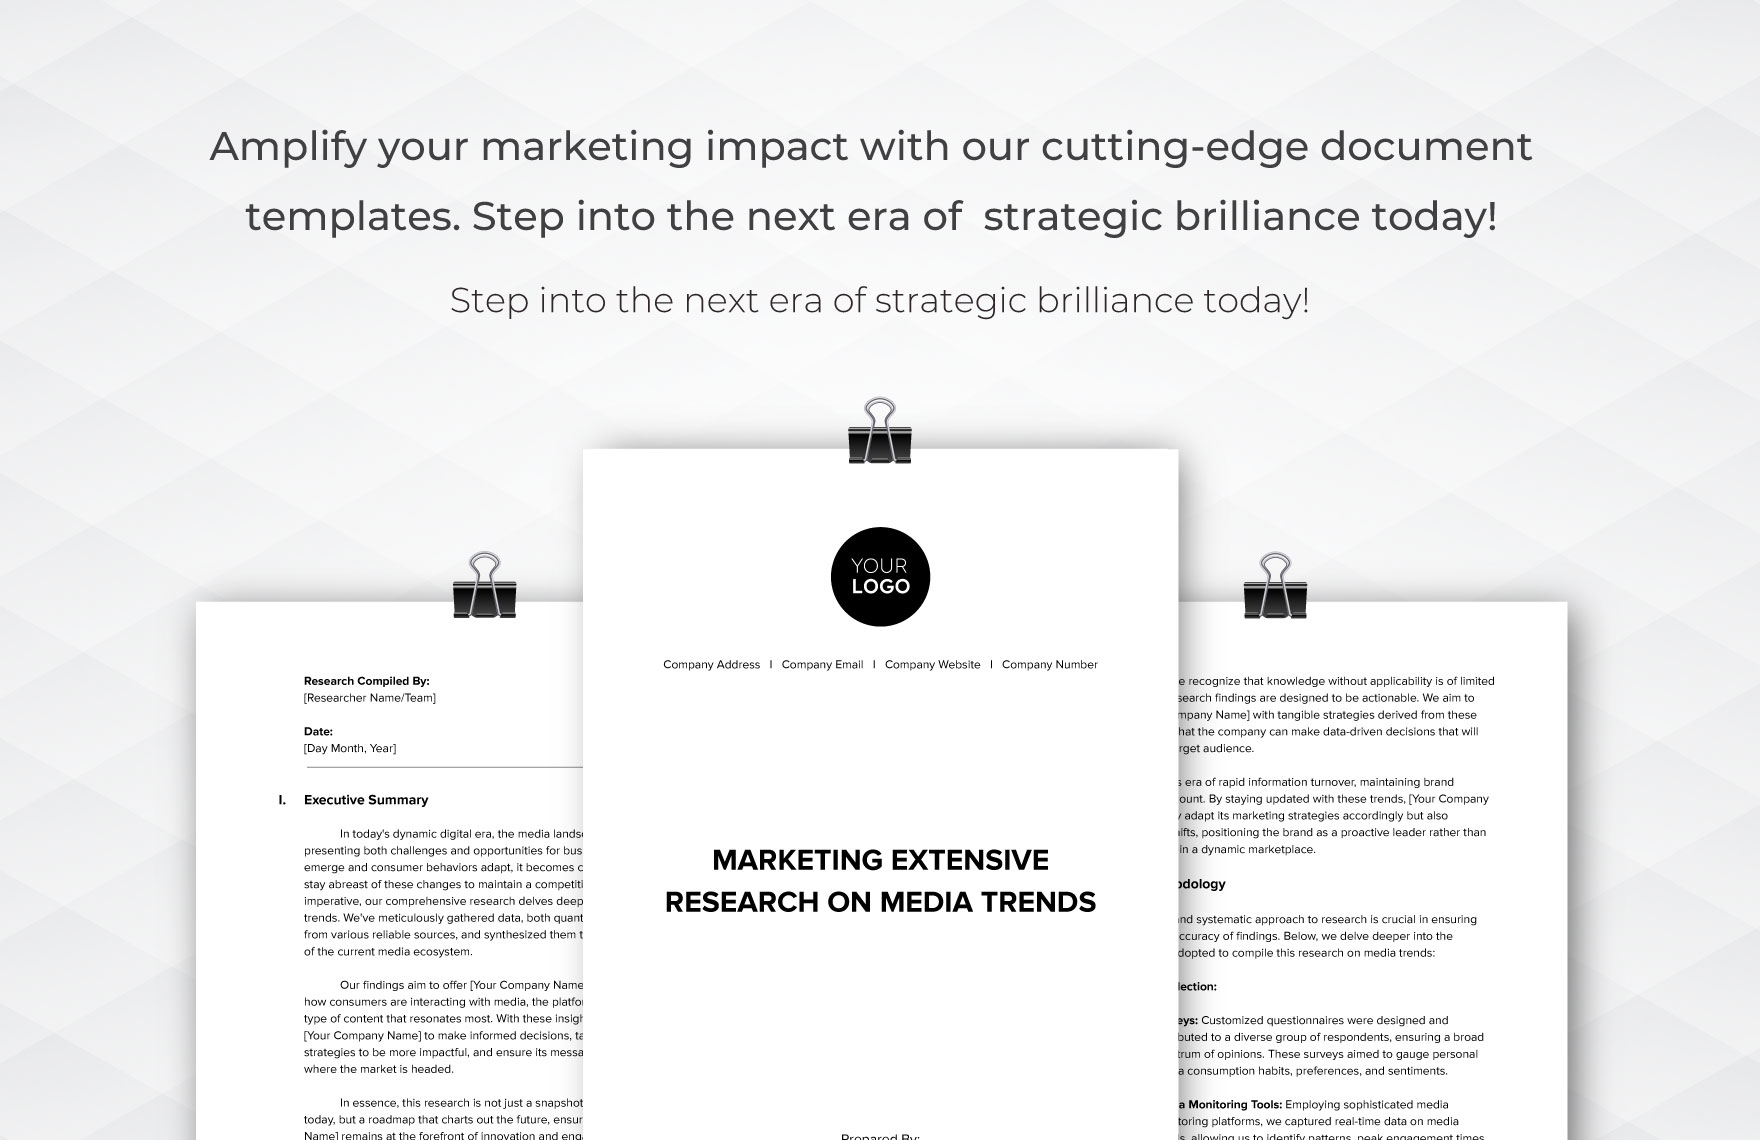 Marketing Extensive Research on Media Trends Template